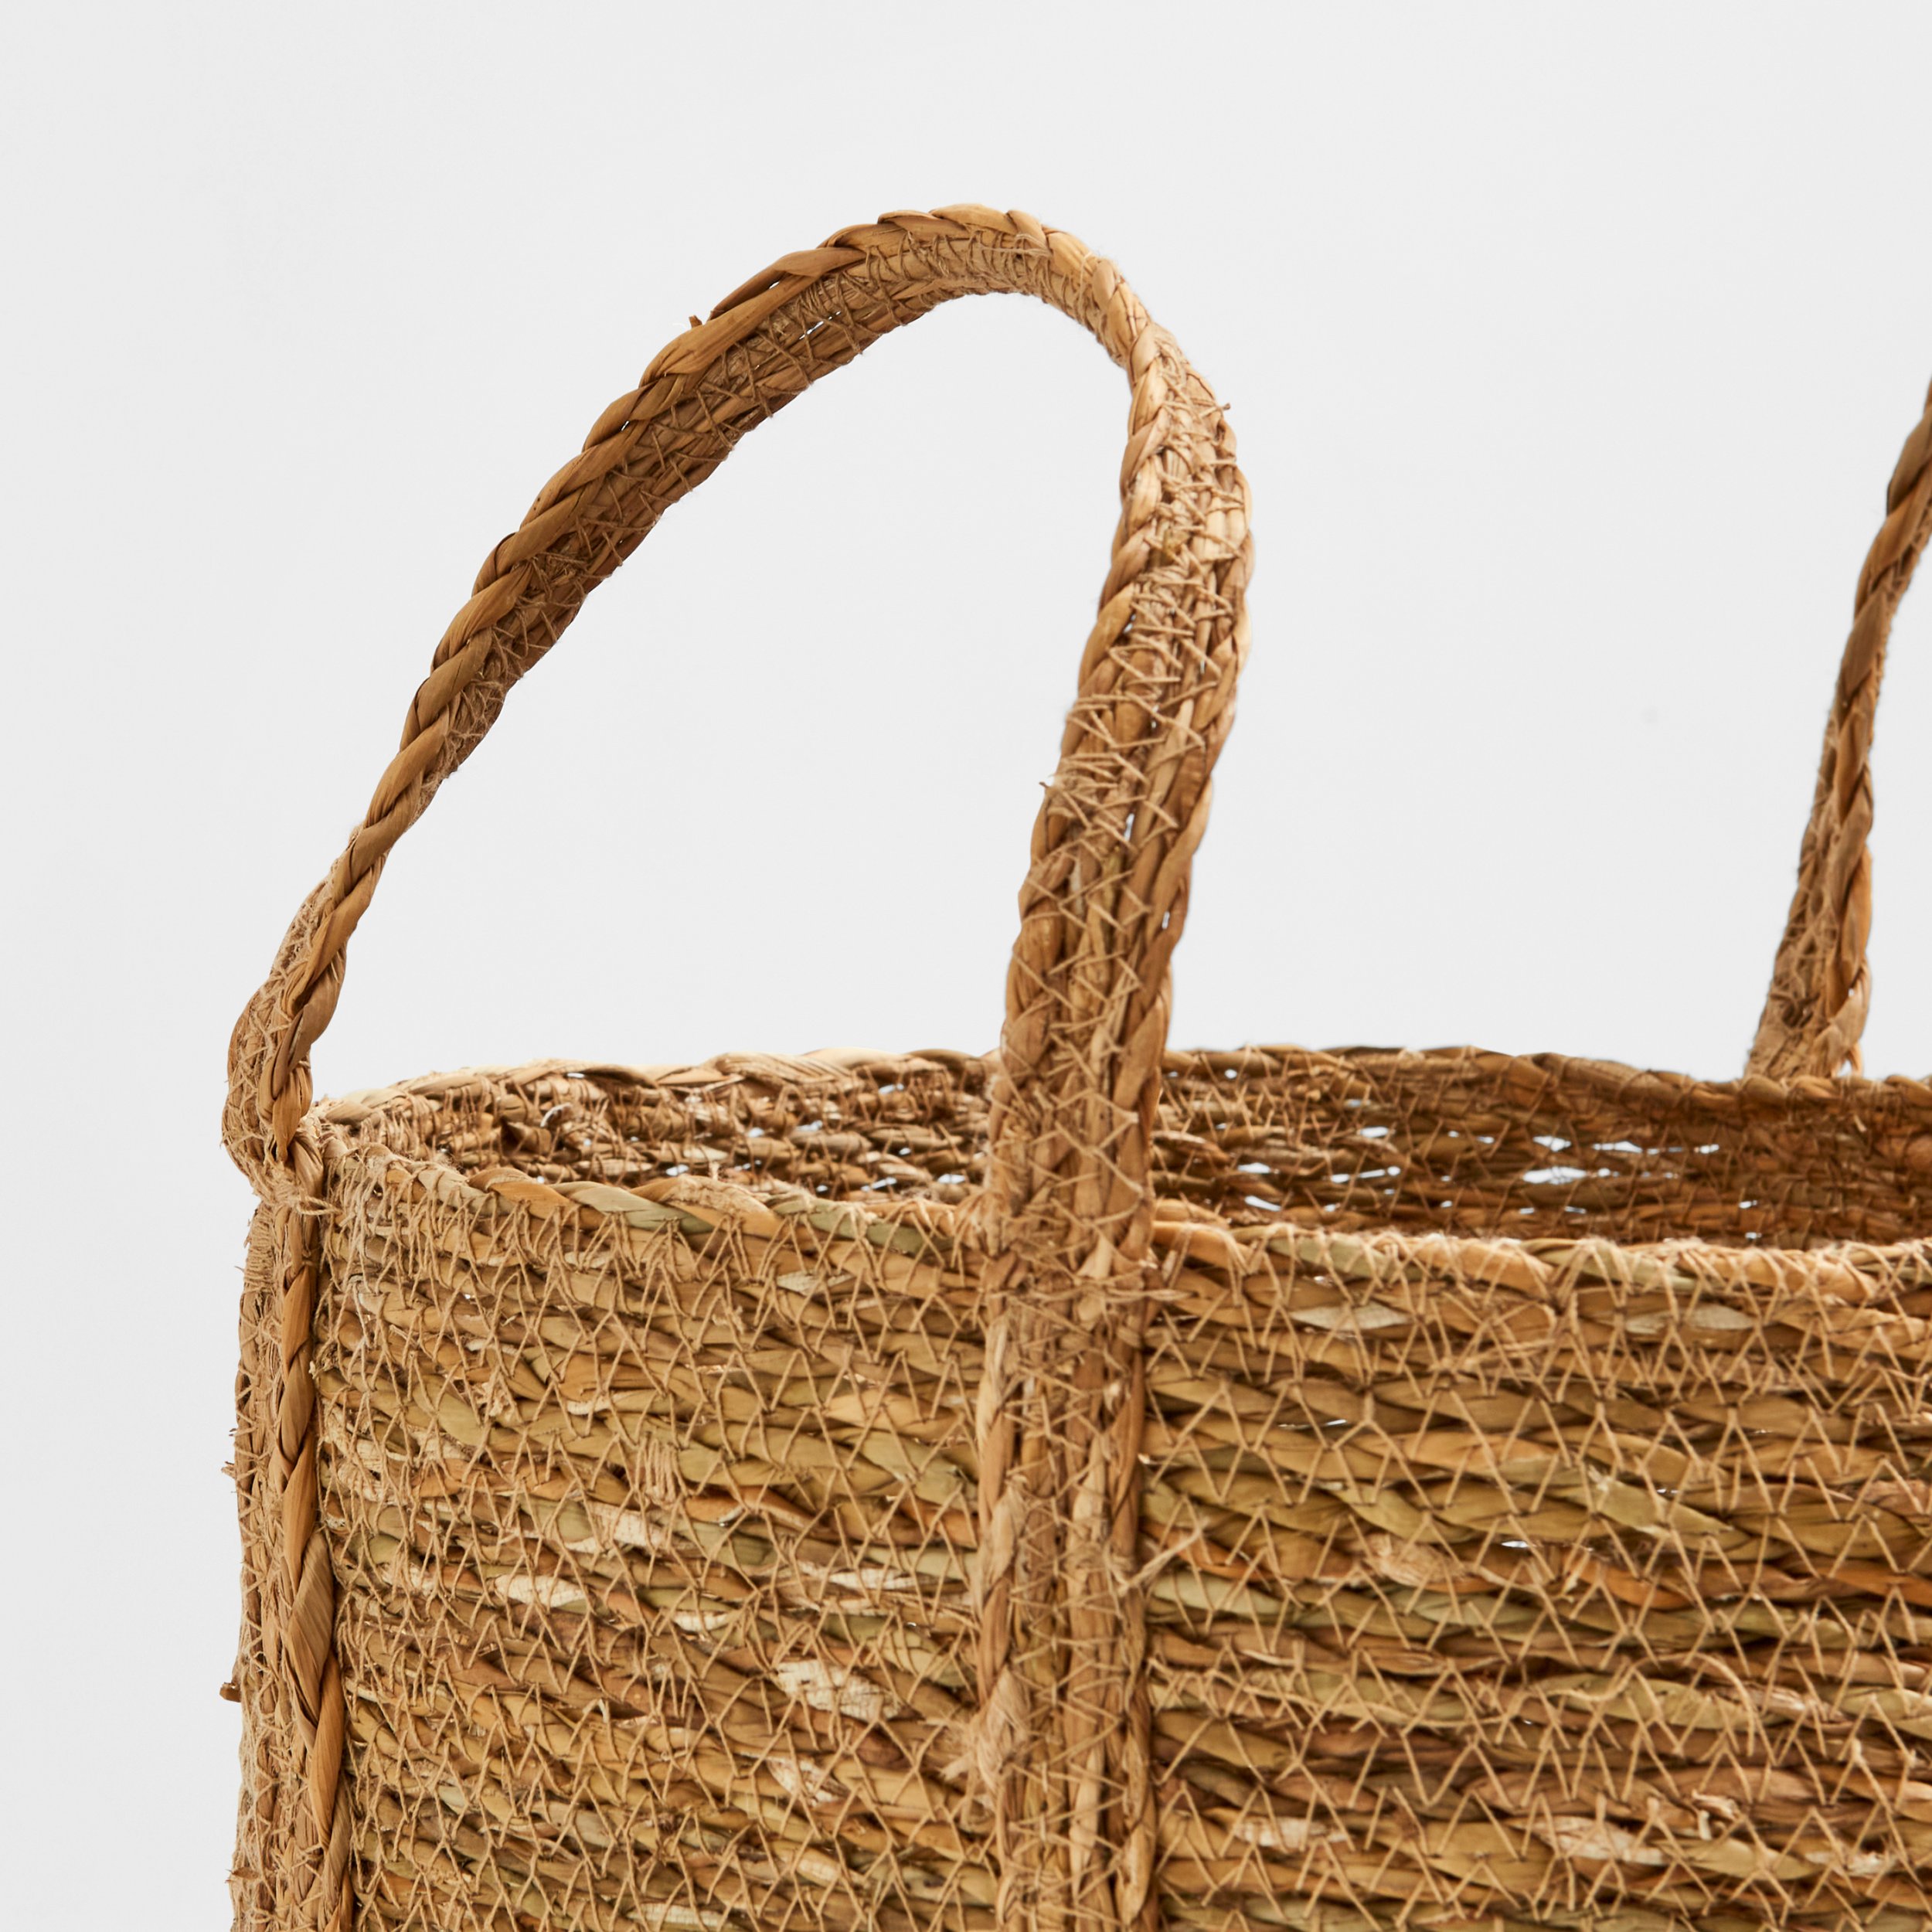 Napa-Home-and-Garden-Seagrass-Round-Baskets-with-Long-Handles-Set-of-3-Seagrass_Final_3.jpg